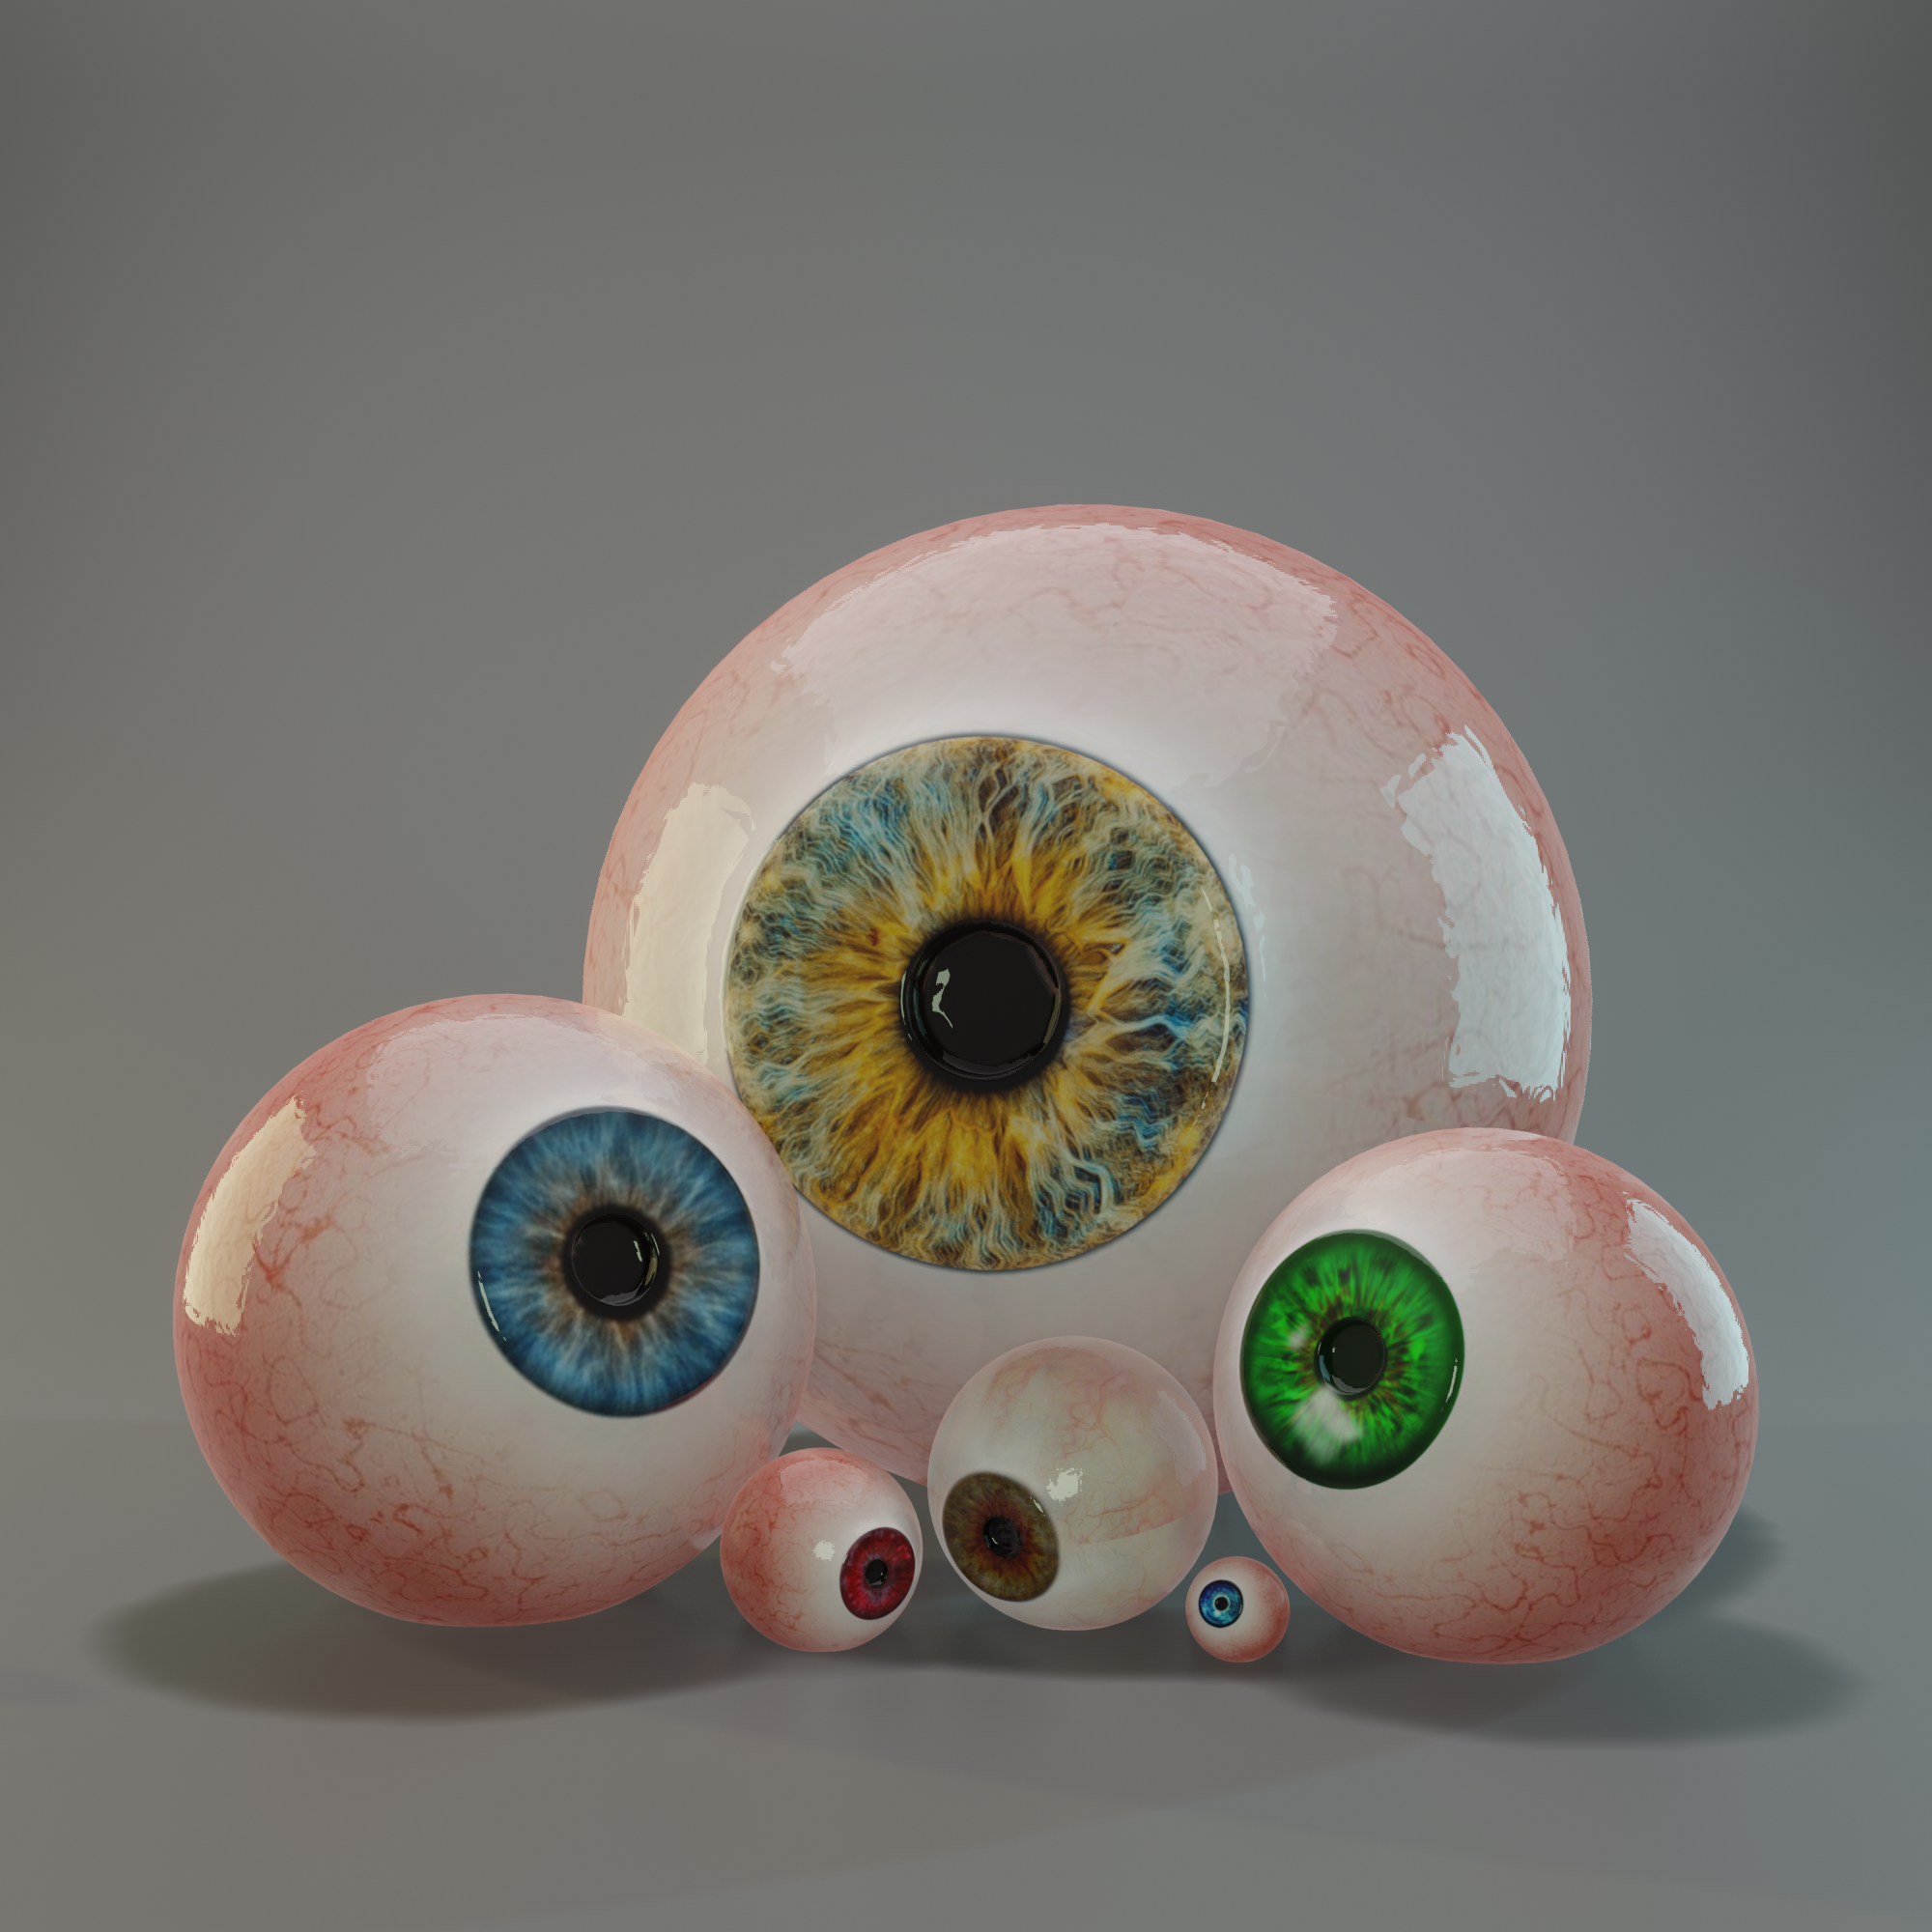 Variety of Eyes preview image 1